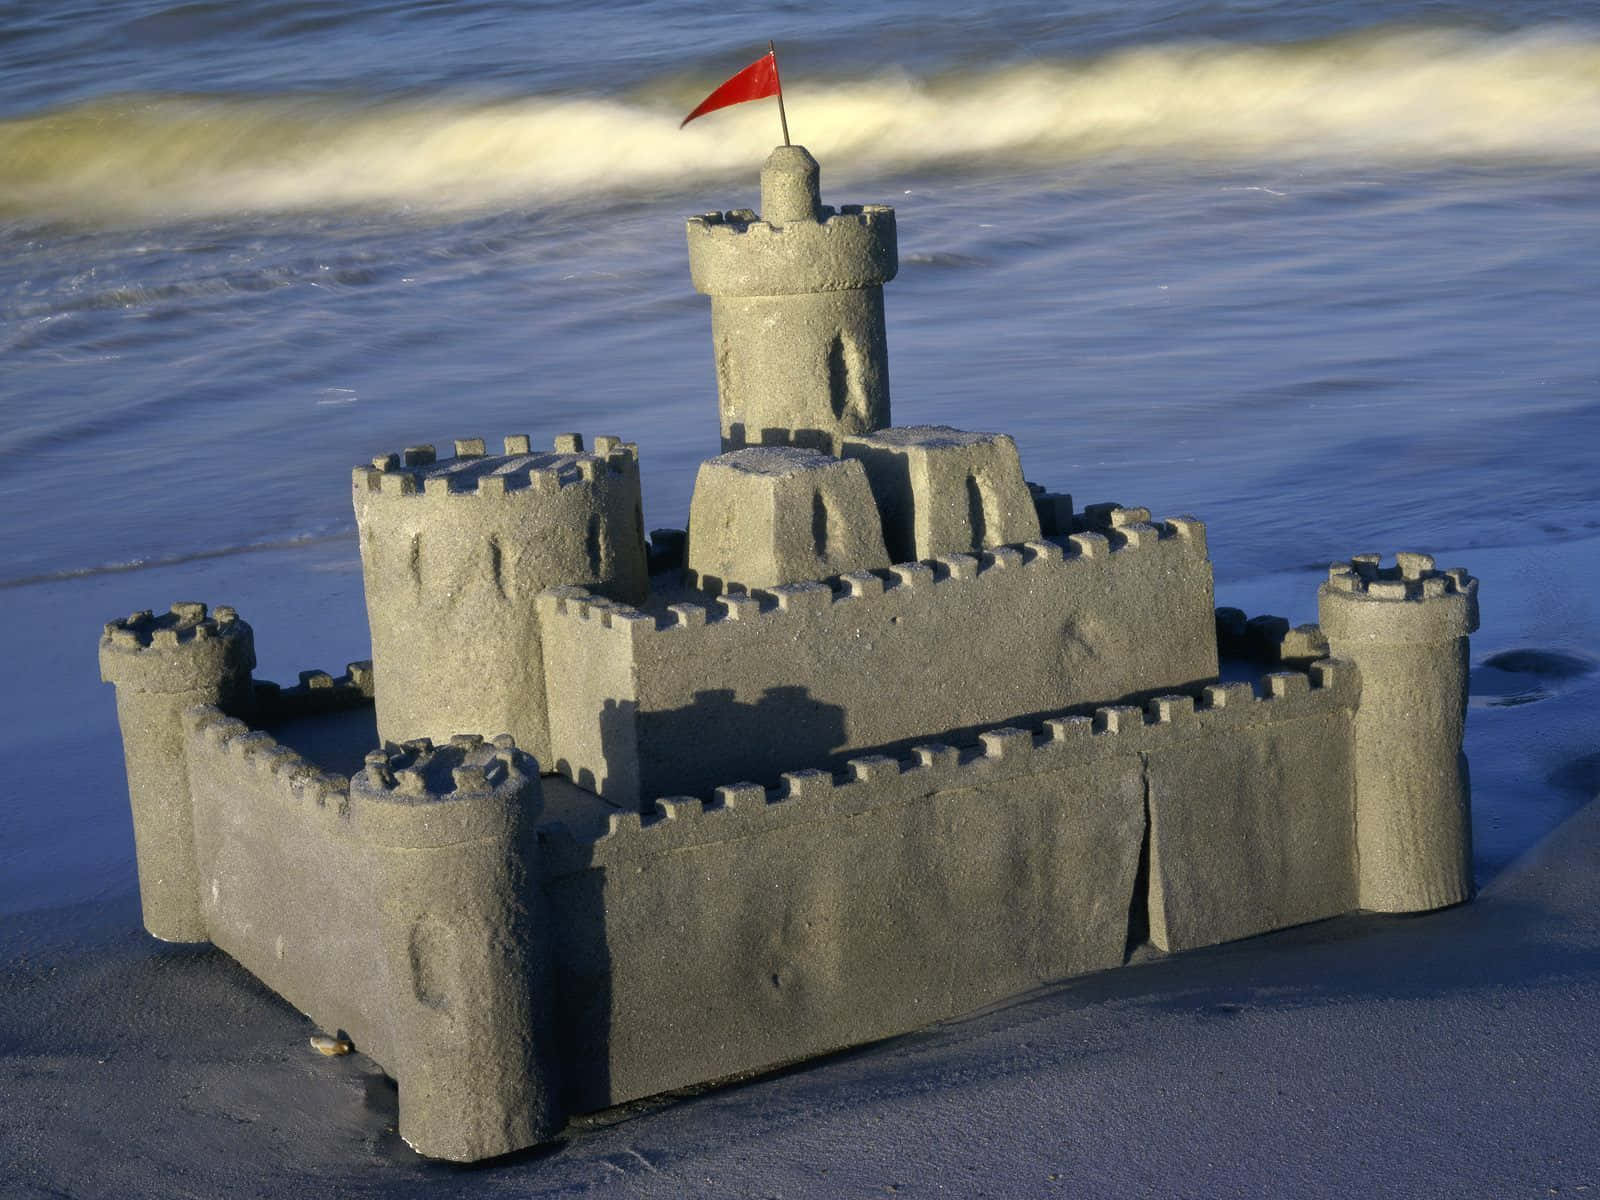 Majestic Sandcastle by the Beach Wallpaper